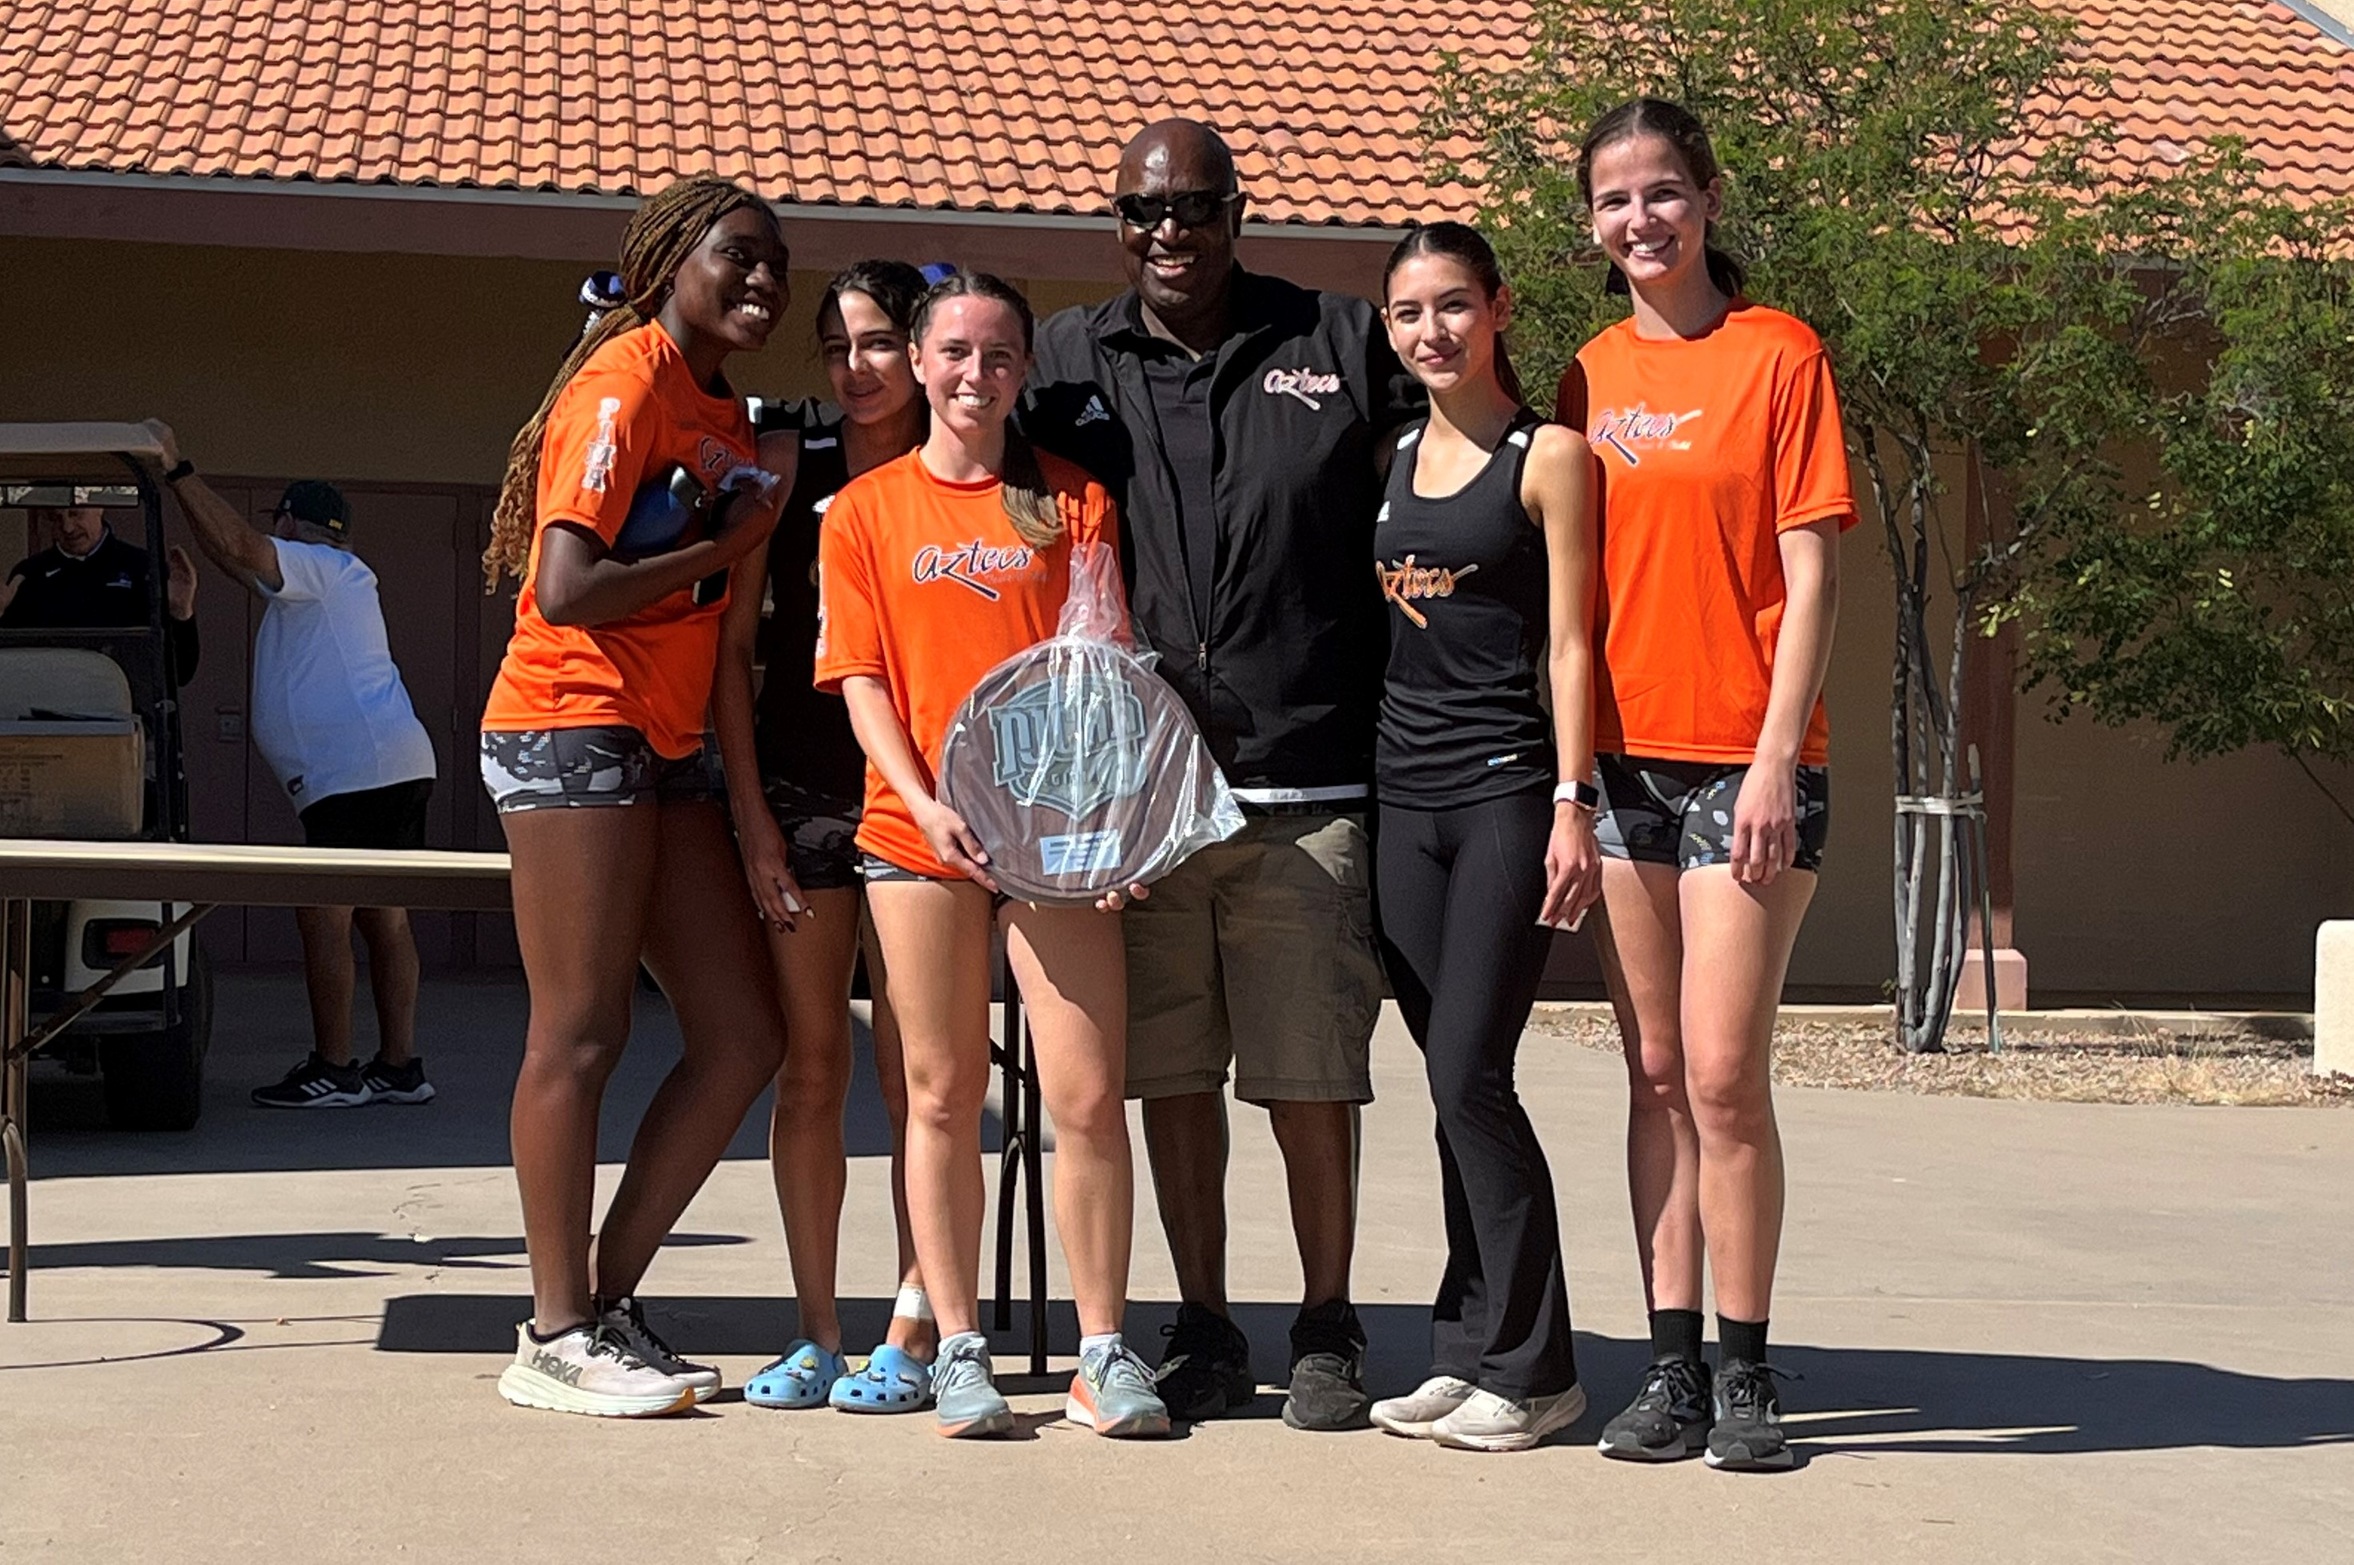 Aztecs Women's Cross Country took second place in Region I, Division I but were fifth in ACCAC conference. Marissa Lopez (Sahuarita HS), fifth from the left, earned both All-ACCAC and All-Region honors. (Left to right): Iyannah Tolliver, Naiomi Hereim, Kate Shoemaker, Coach Al Shirley, Marissa Lopez and Julian Lundberg. Photo by Raymond Suarez